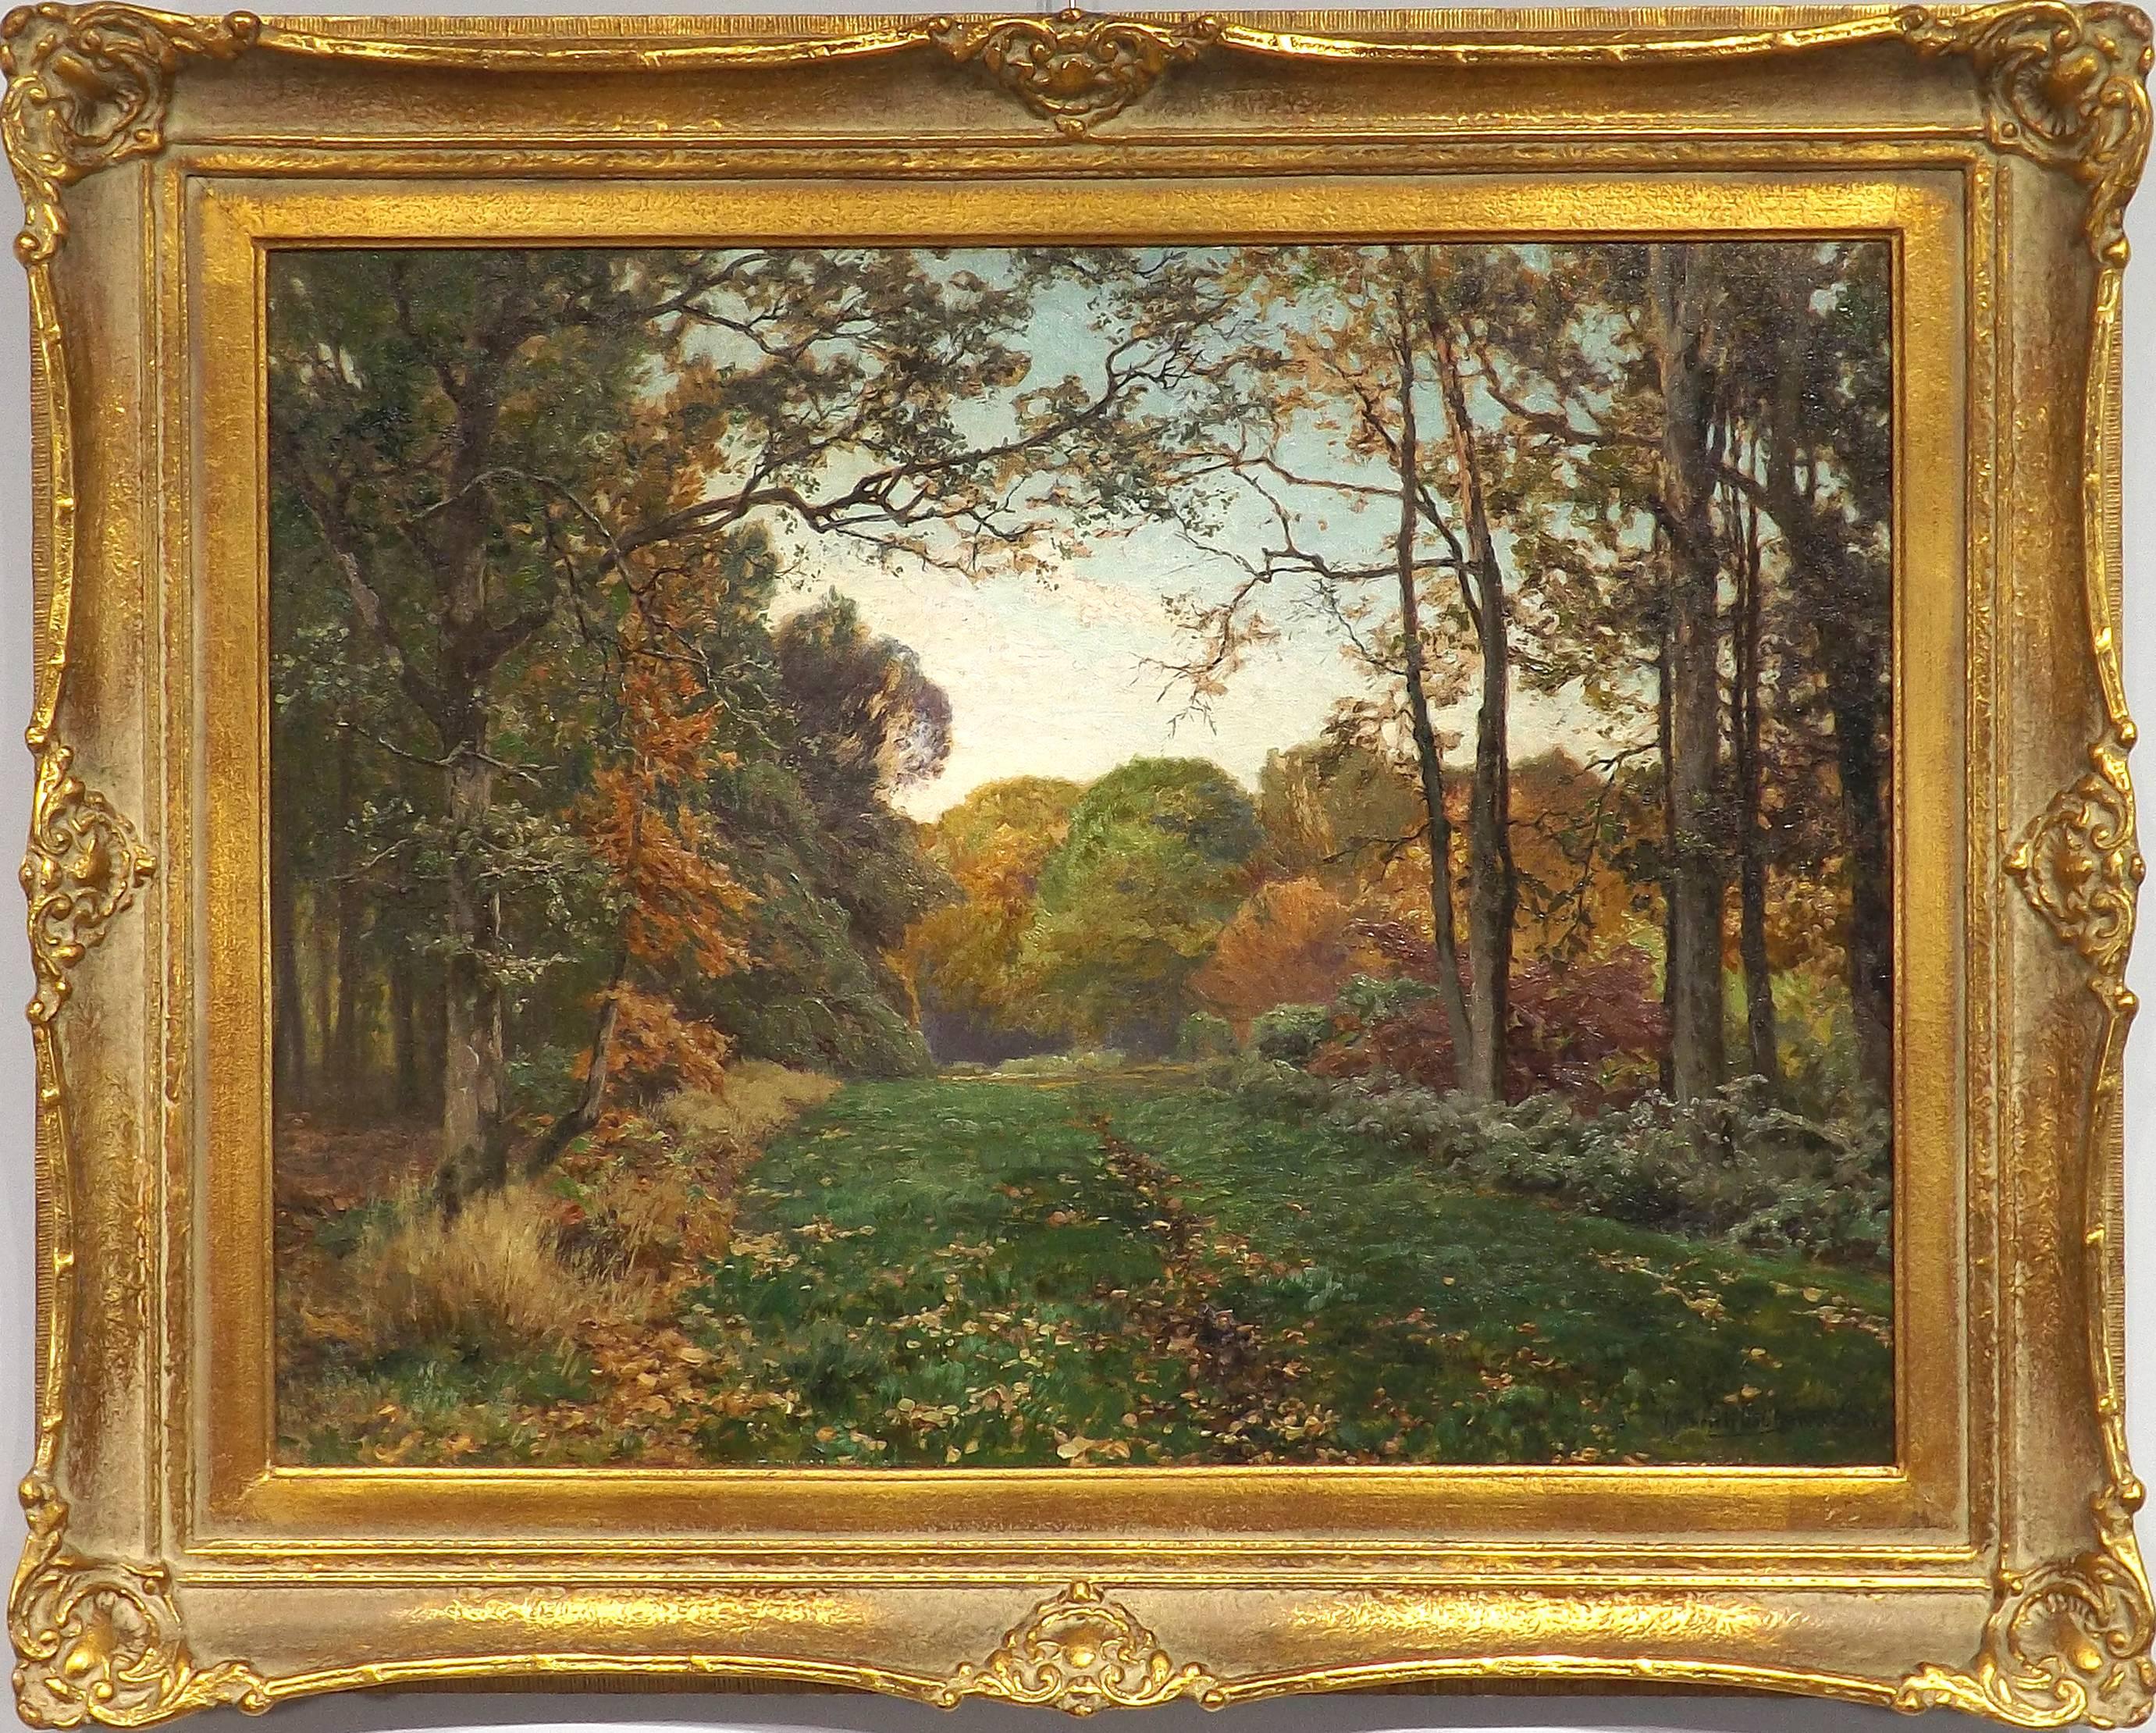 An idyllic scene of a forest path painted by Dusseldorf painter Heinrich Böhmer (1852-1930), with trees starting to show the first signs of autumn.

Böhmer started his studies at the Dusseldorf Art Academy in 1876, and by 1881 he was the star